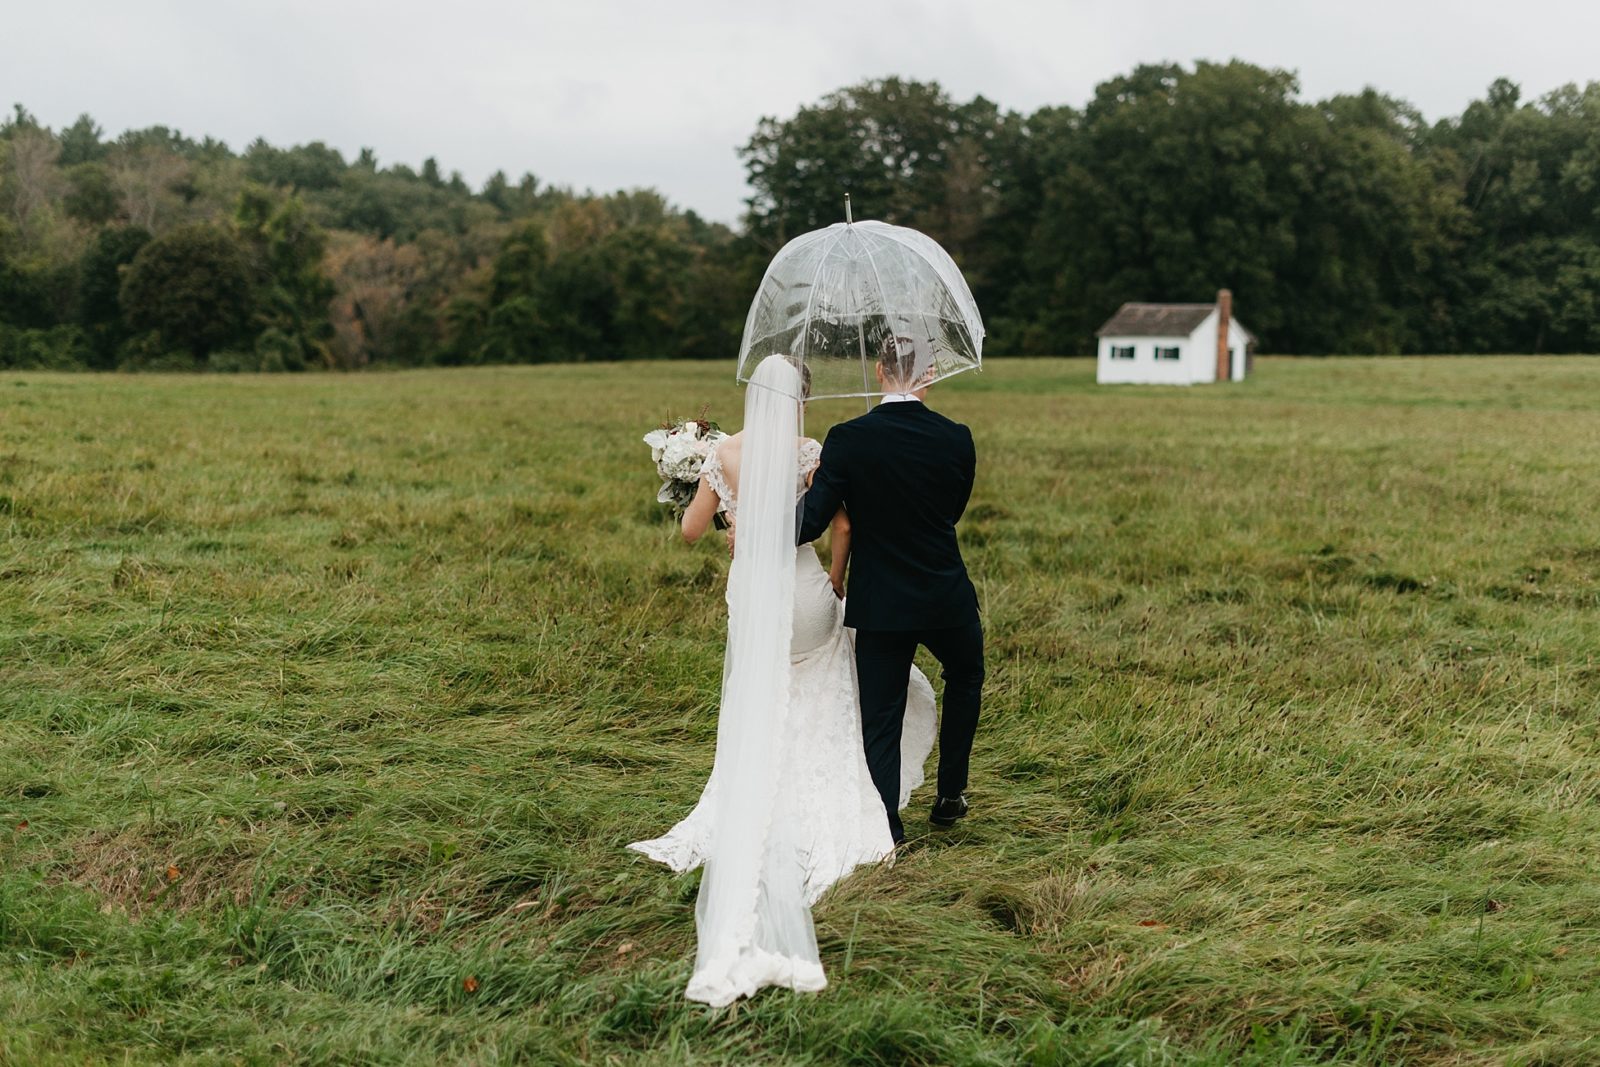 Classy couple walking through grassy field with umbrella towards a small white house in New England